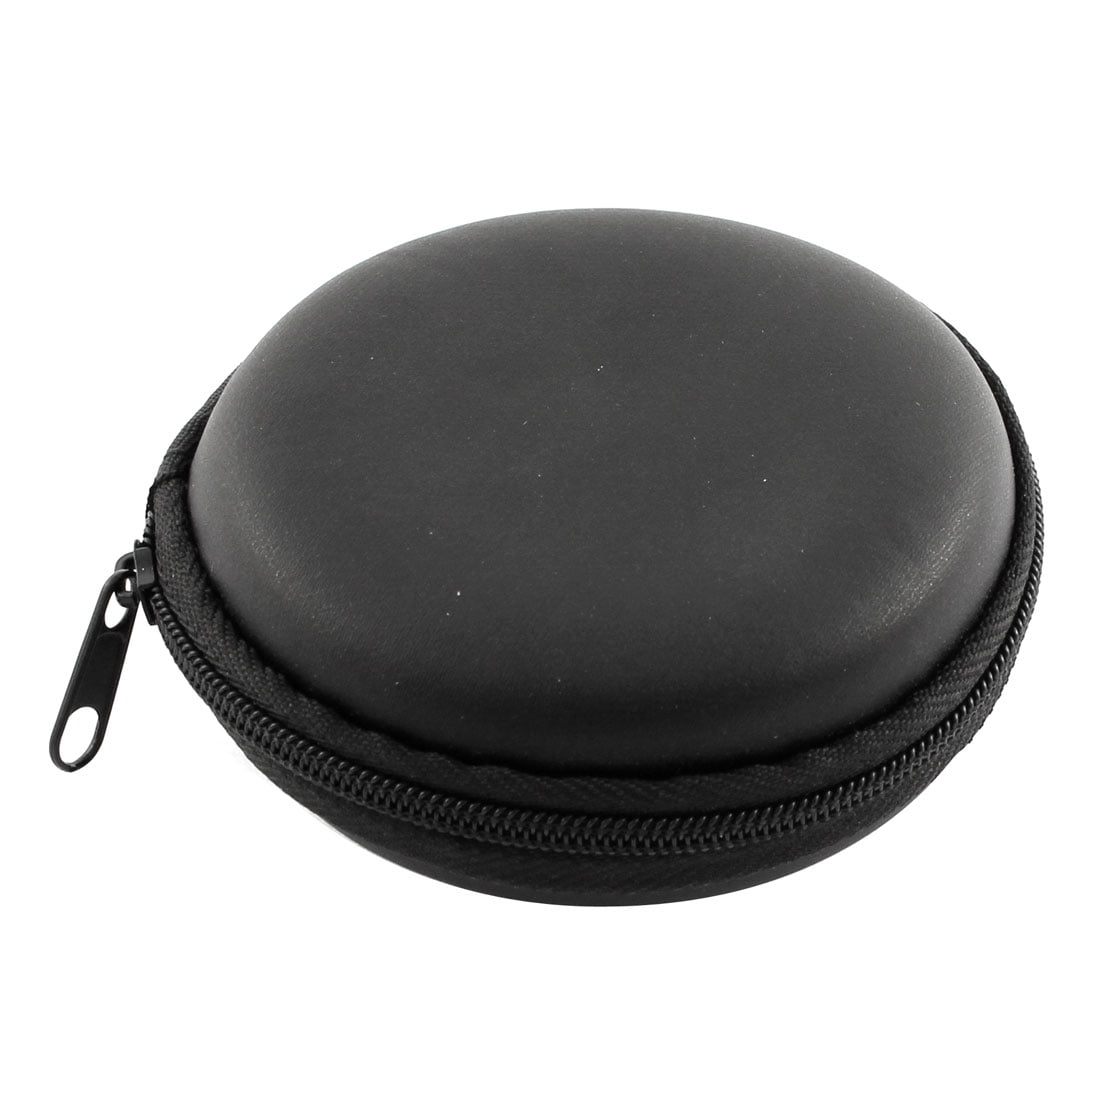 Carrying Storage Bag Pouch Hard Case for Earphone Headphone Earbud SD TF Card Zi 